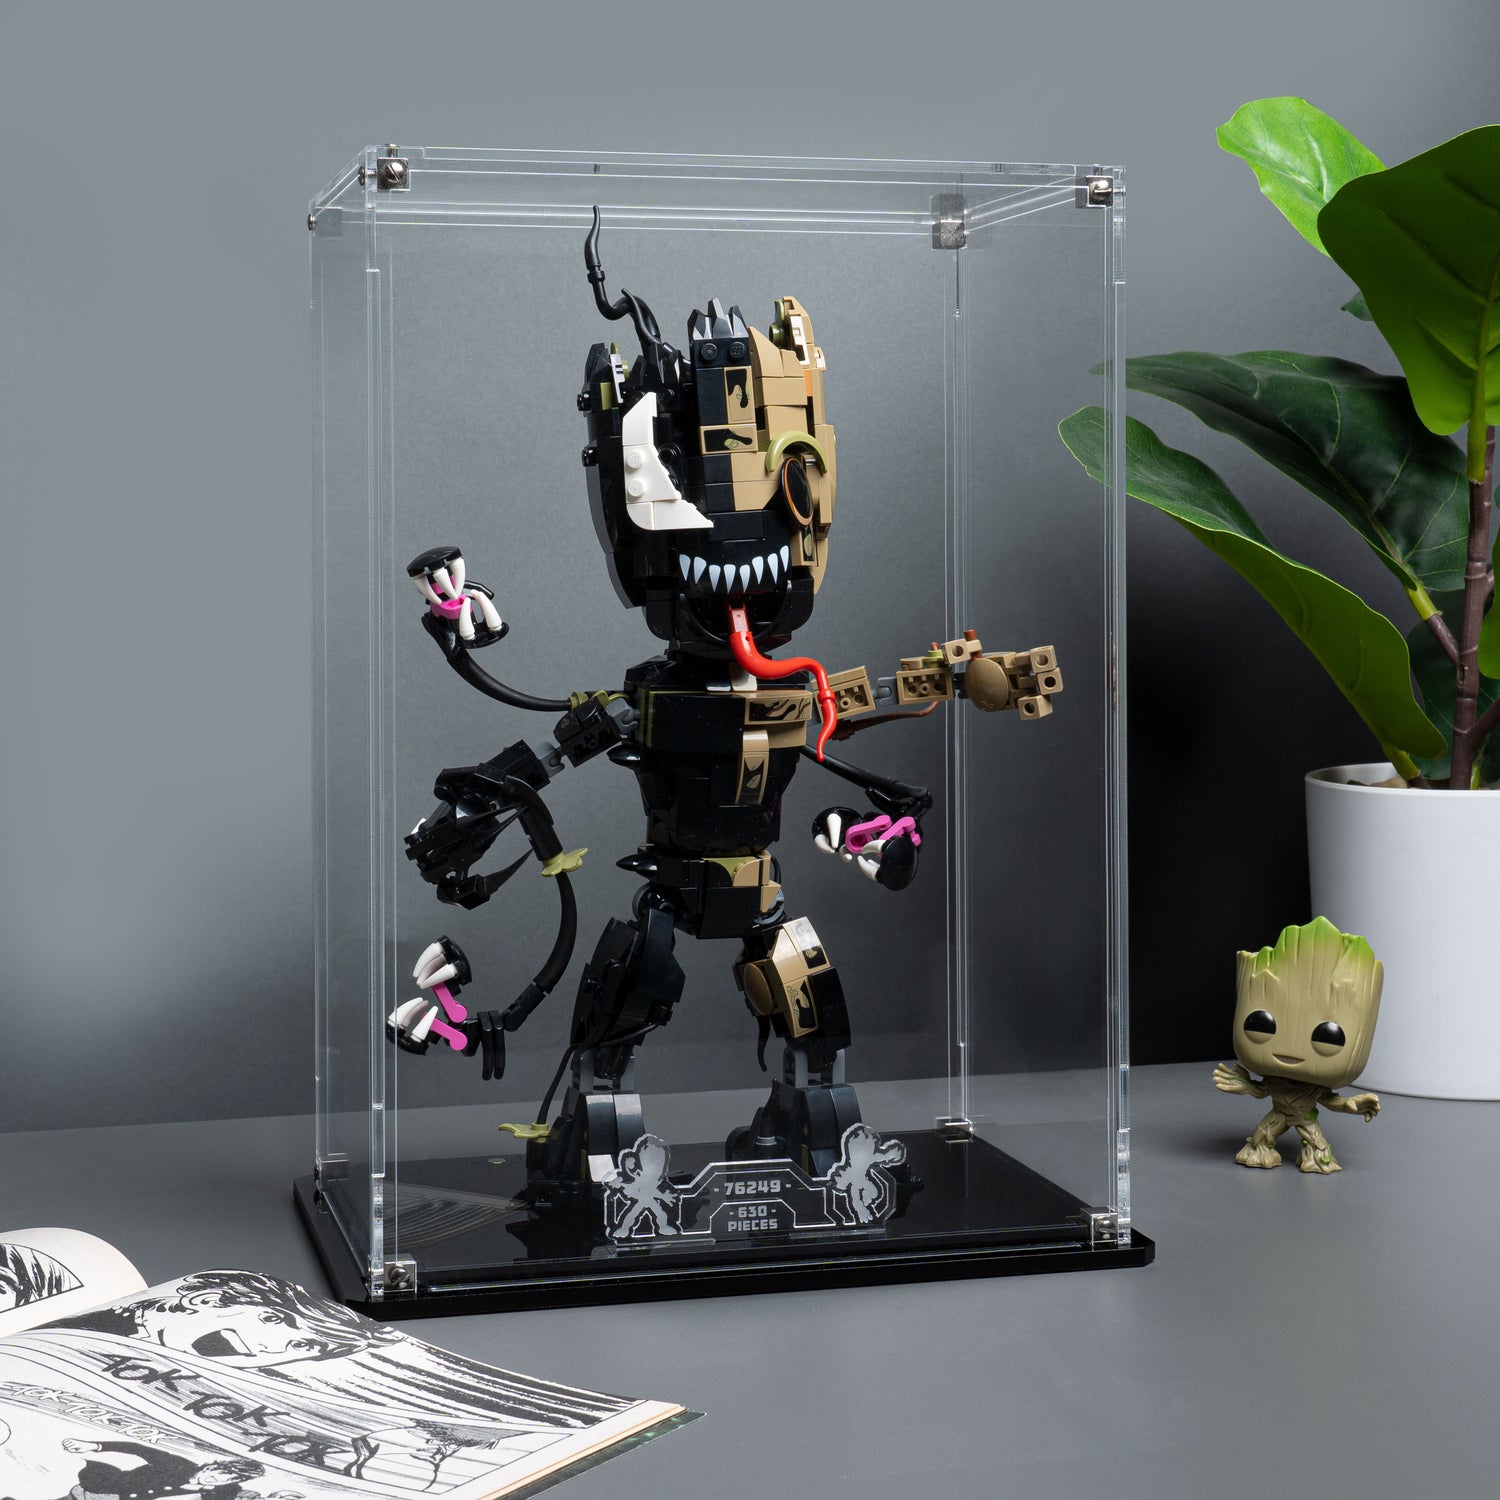 Showcase this epic movie crossover set with our crystal clear Acrylic display case.